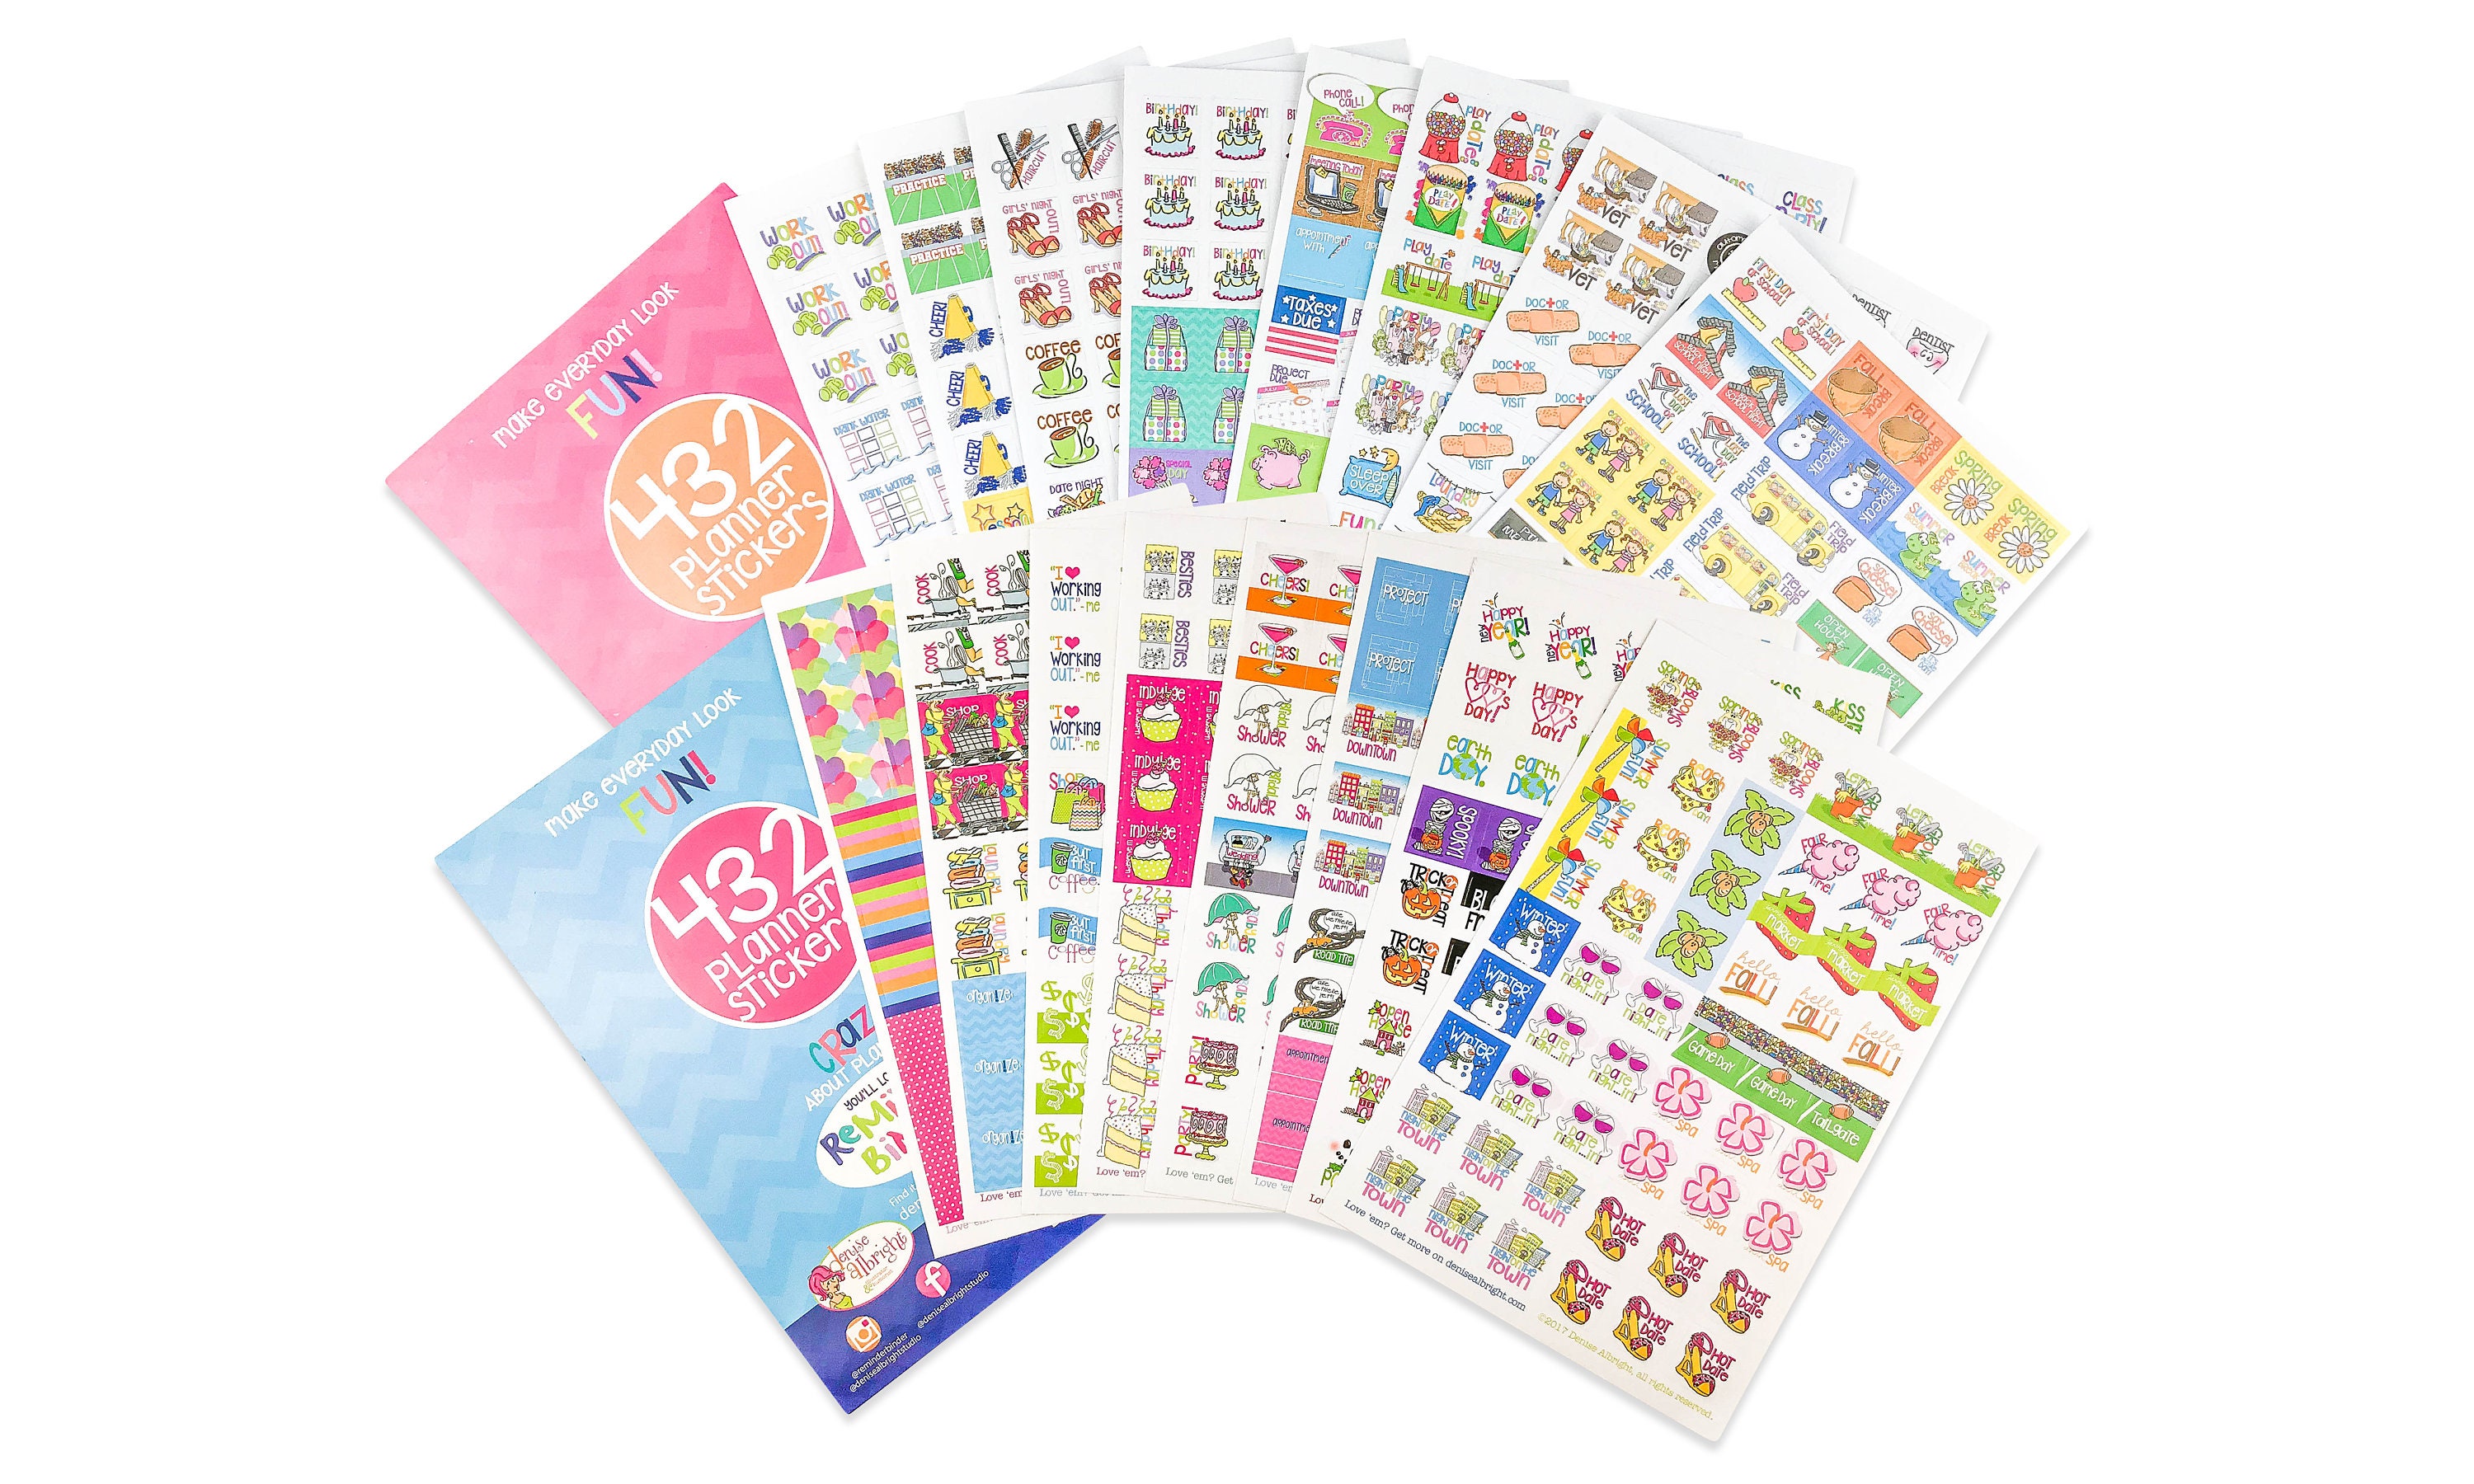 864 Event Planner Stickers for any planner or wall calendar